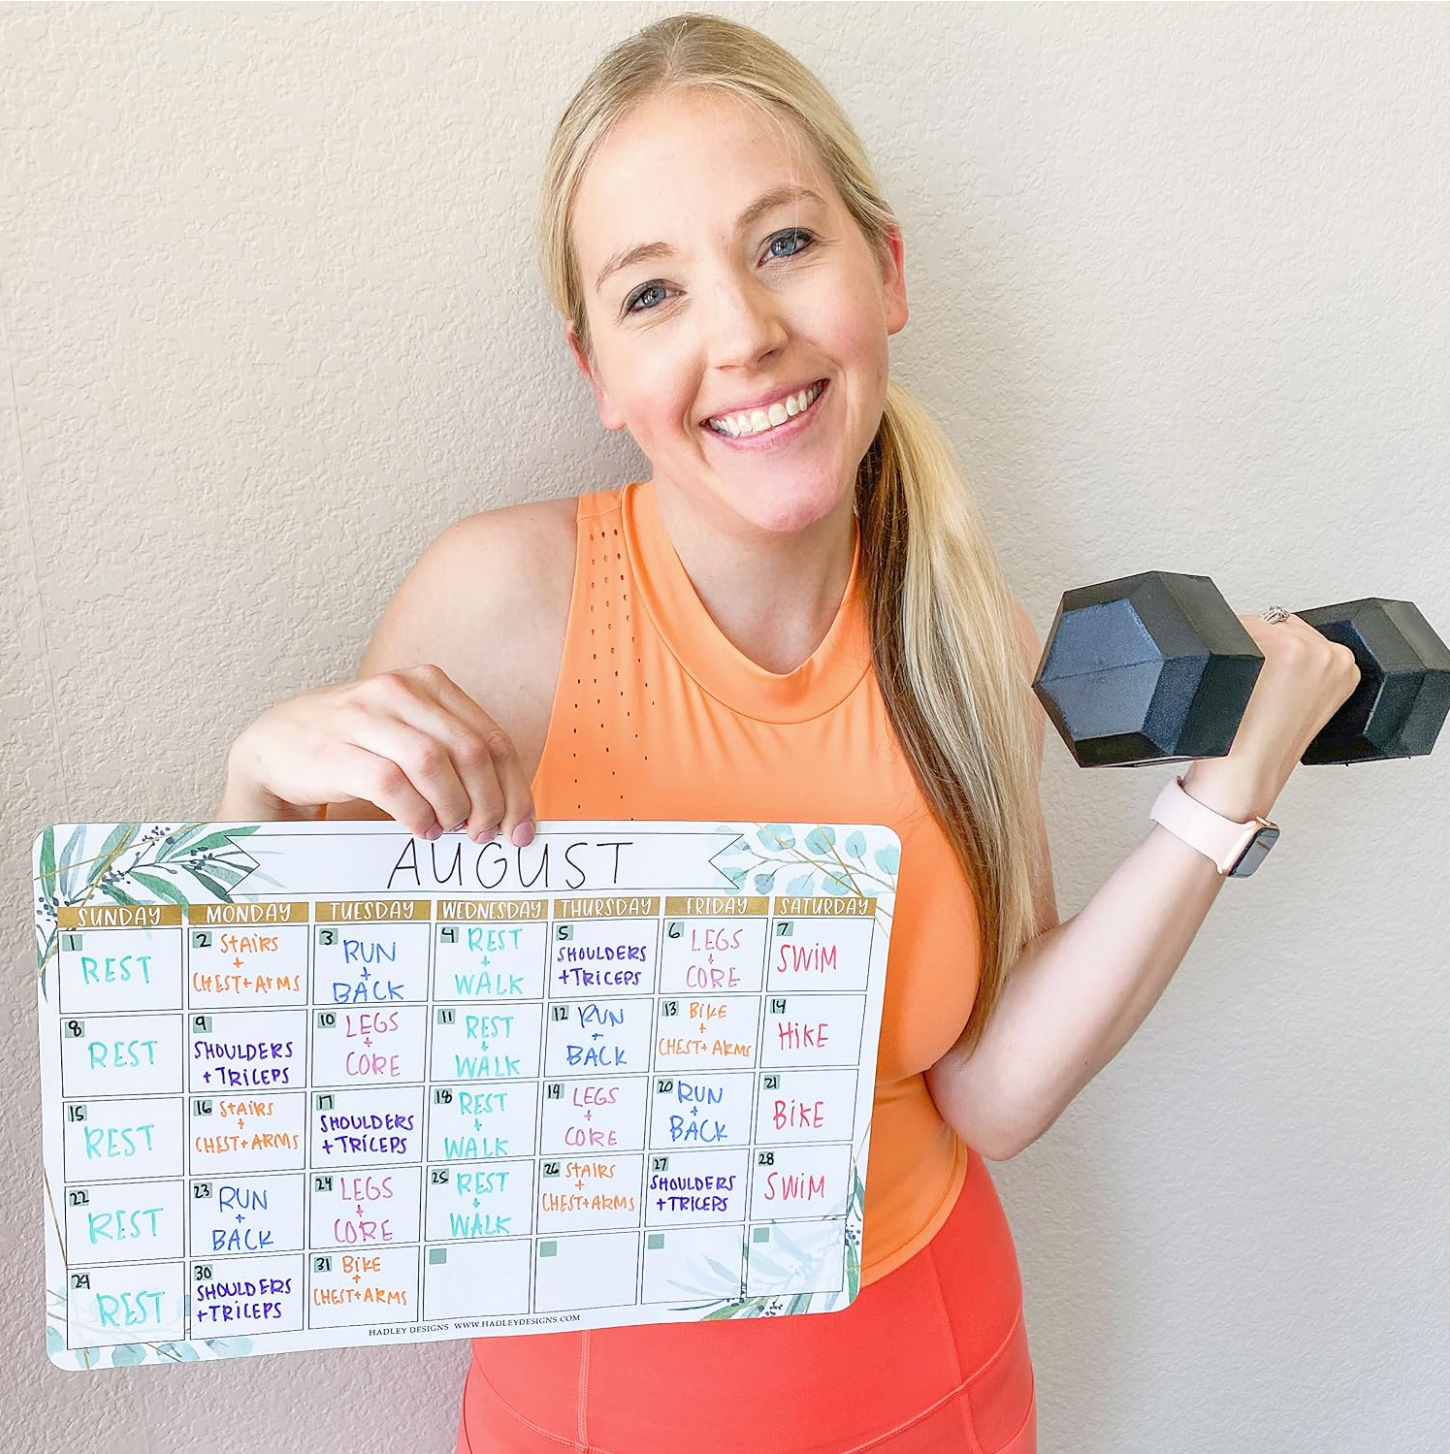 Becca showing a calendar used for planning workouts